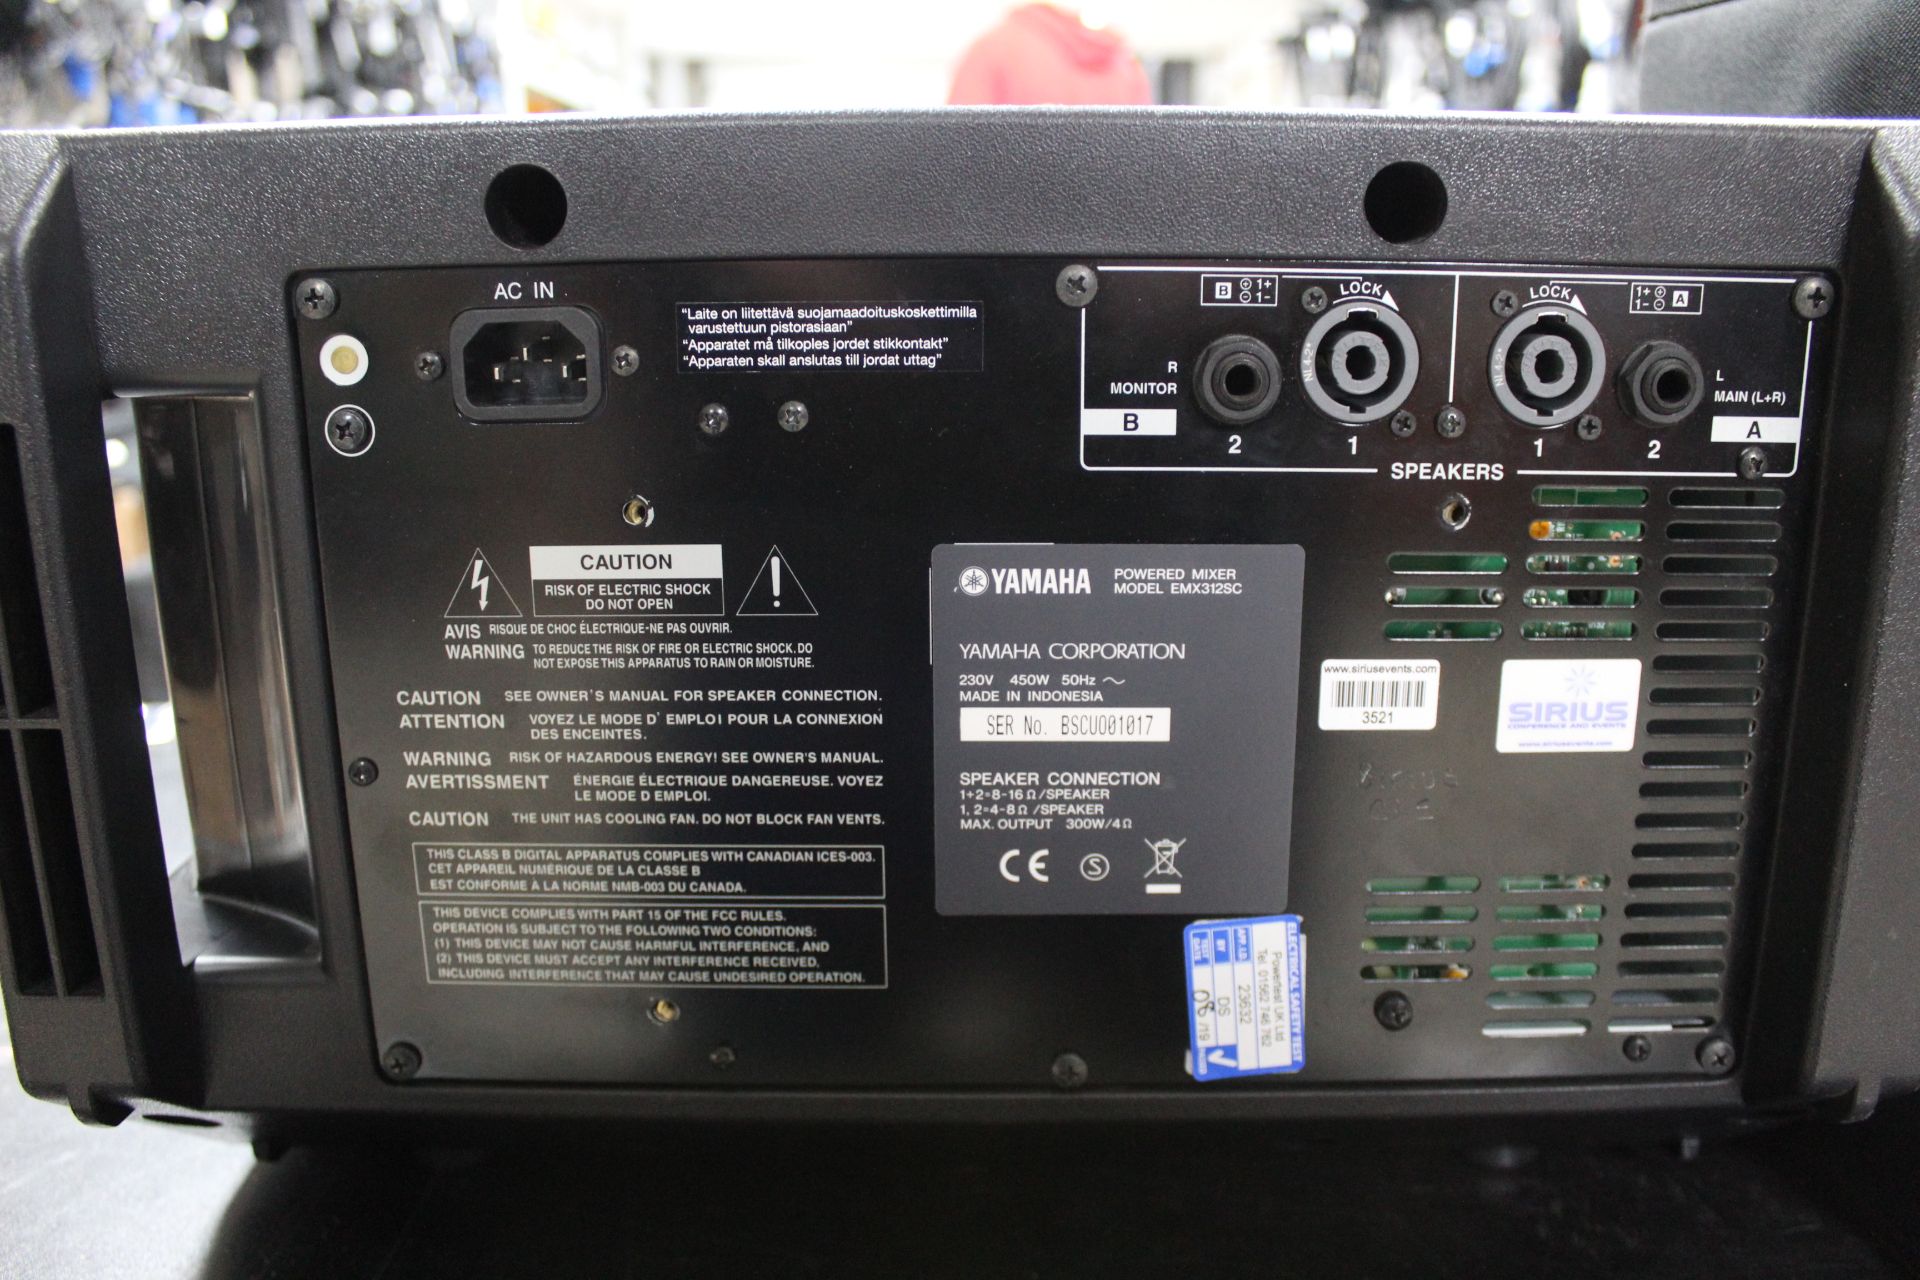 Yamaha EMX312SC 12 channel mixer/amplifier, Serial No. BSCU001017 with 1x IEC, 2x speaker cables - Image 3 of 4